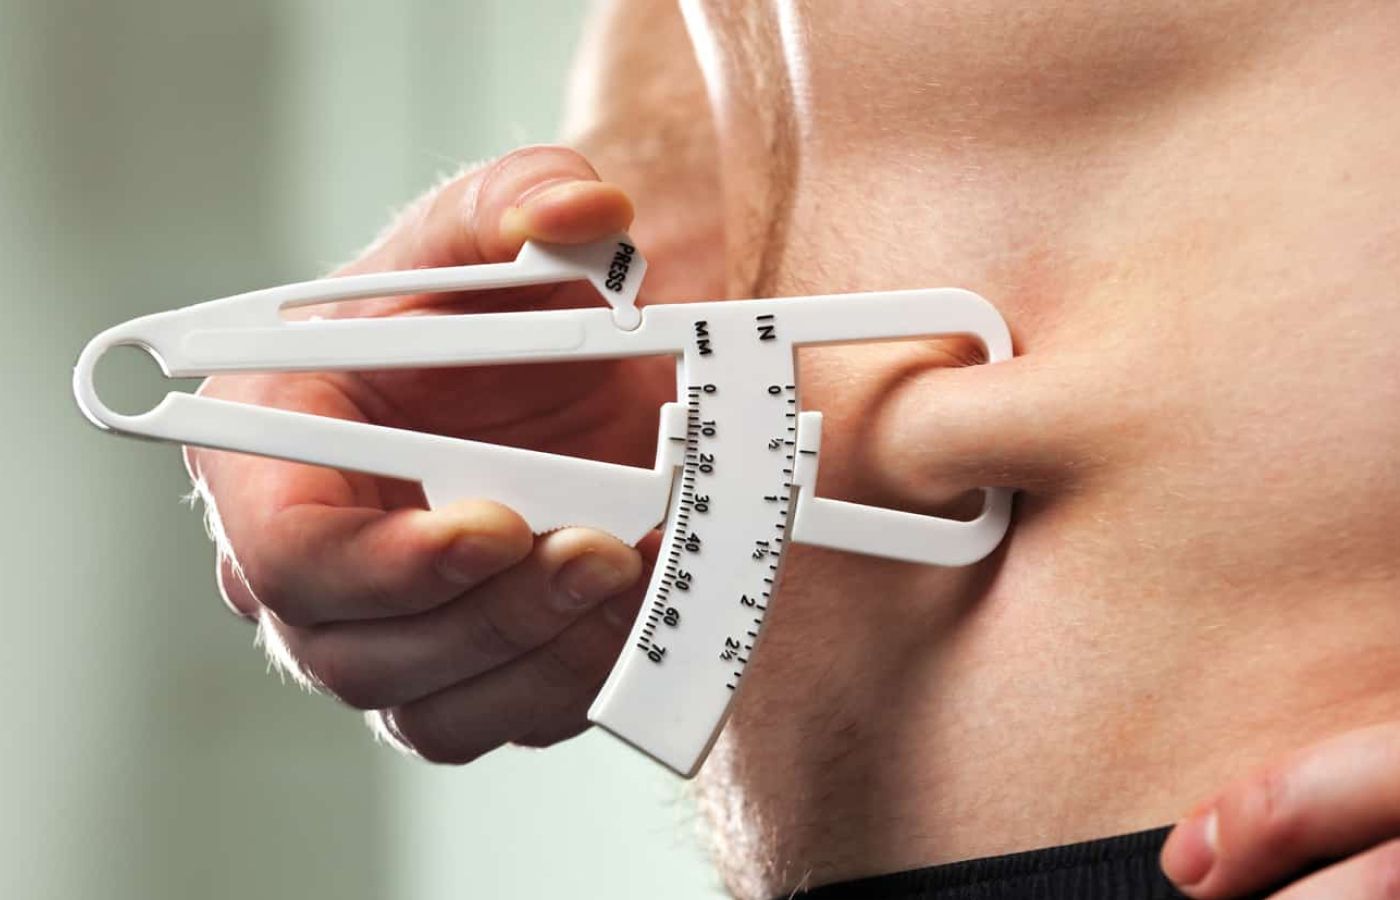 How to Measure Body Fat: 4 Methods to Try